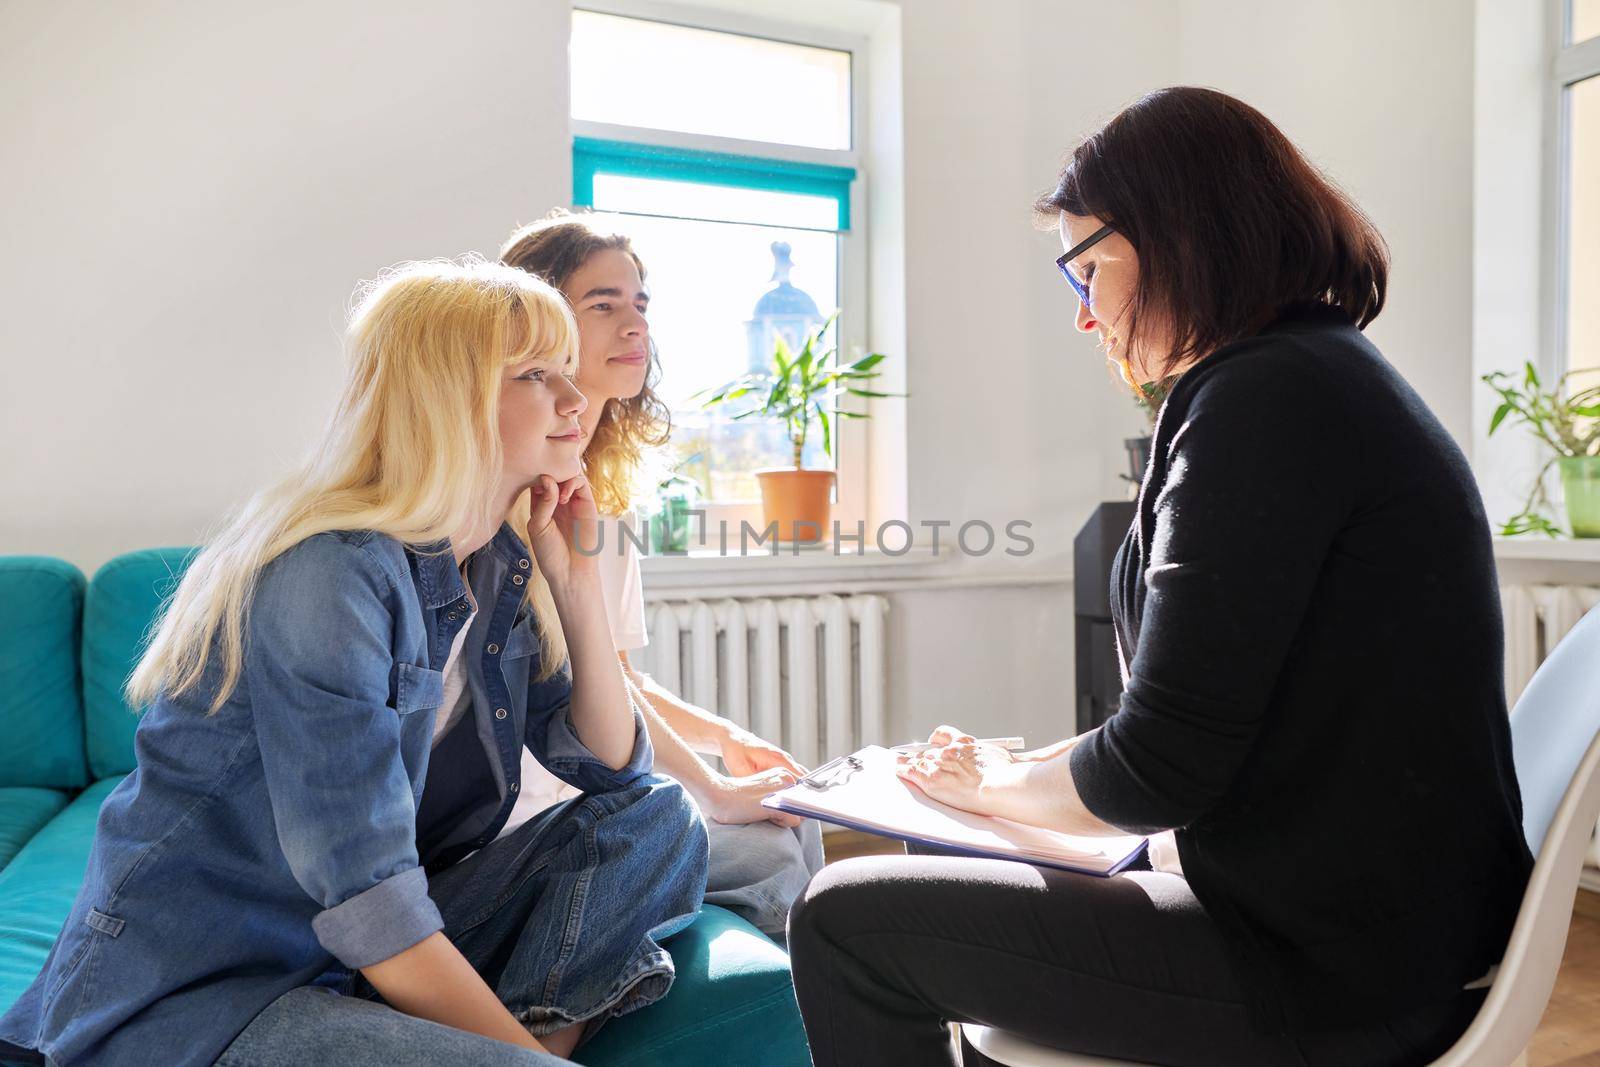 Teenagers guy and girl 16, 17 years old at meeting with teacher, school psychologist, counselor, sitting together talking, discussing. Professional help for adolescents, social issues, help in studies